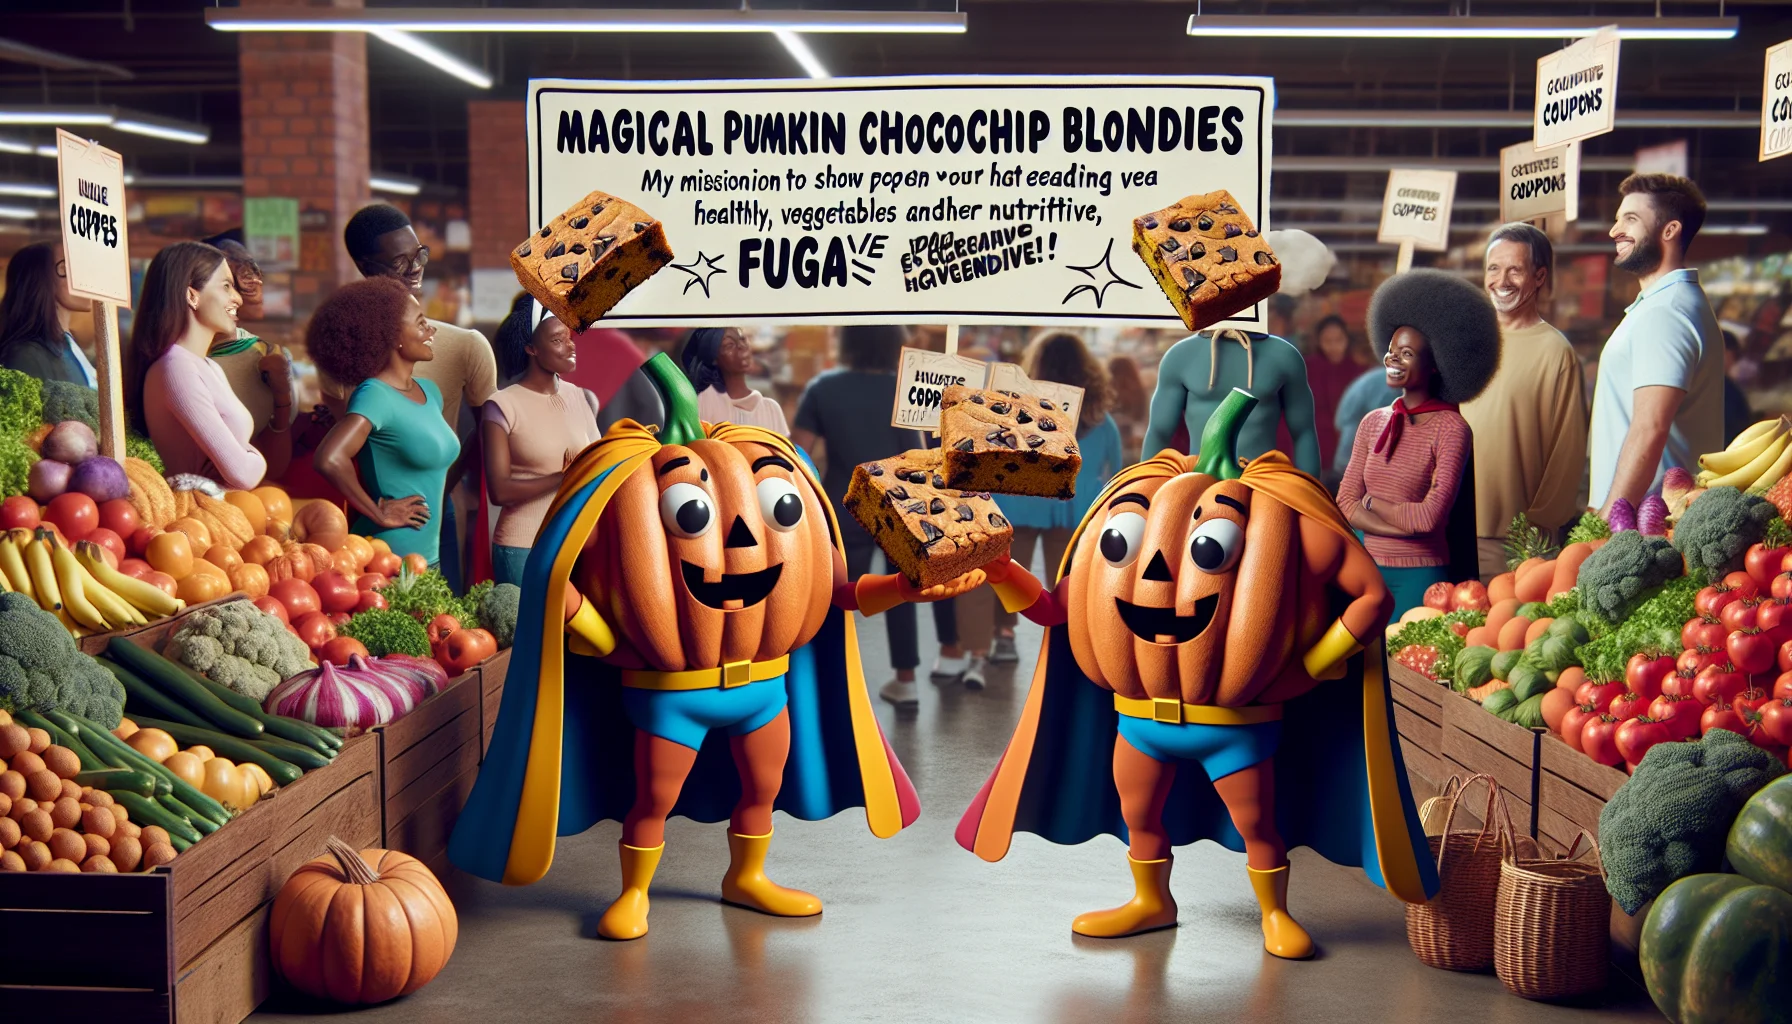 Create a creative and comical scene where Magical Pumpkin Chocolate Chip Blondies are acting as characters. They are donned in superhero capes, buzzing animatedly in a market. Their mission is to show people that eating healthily is not expensive. To do this, they are distributing coupons granting huge discounts on fruits, vegetables, and other nutritious items. Their charm and the delicious aroma wafting from them have attracted a multicultural crowd of people, African, Hispanic, Asian, and Caucasian, both men and women who are curiously approaching, intrigued by these healthy superheroes.